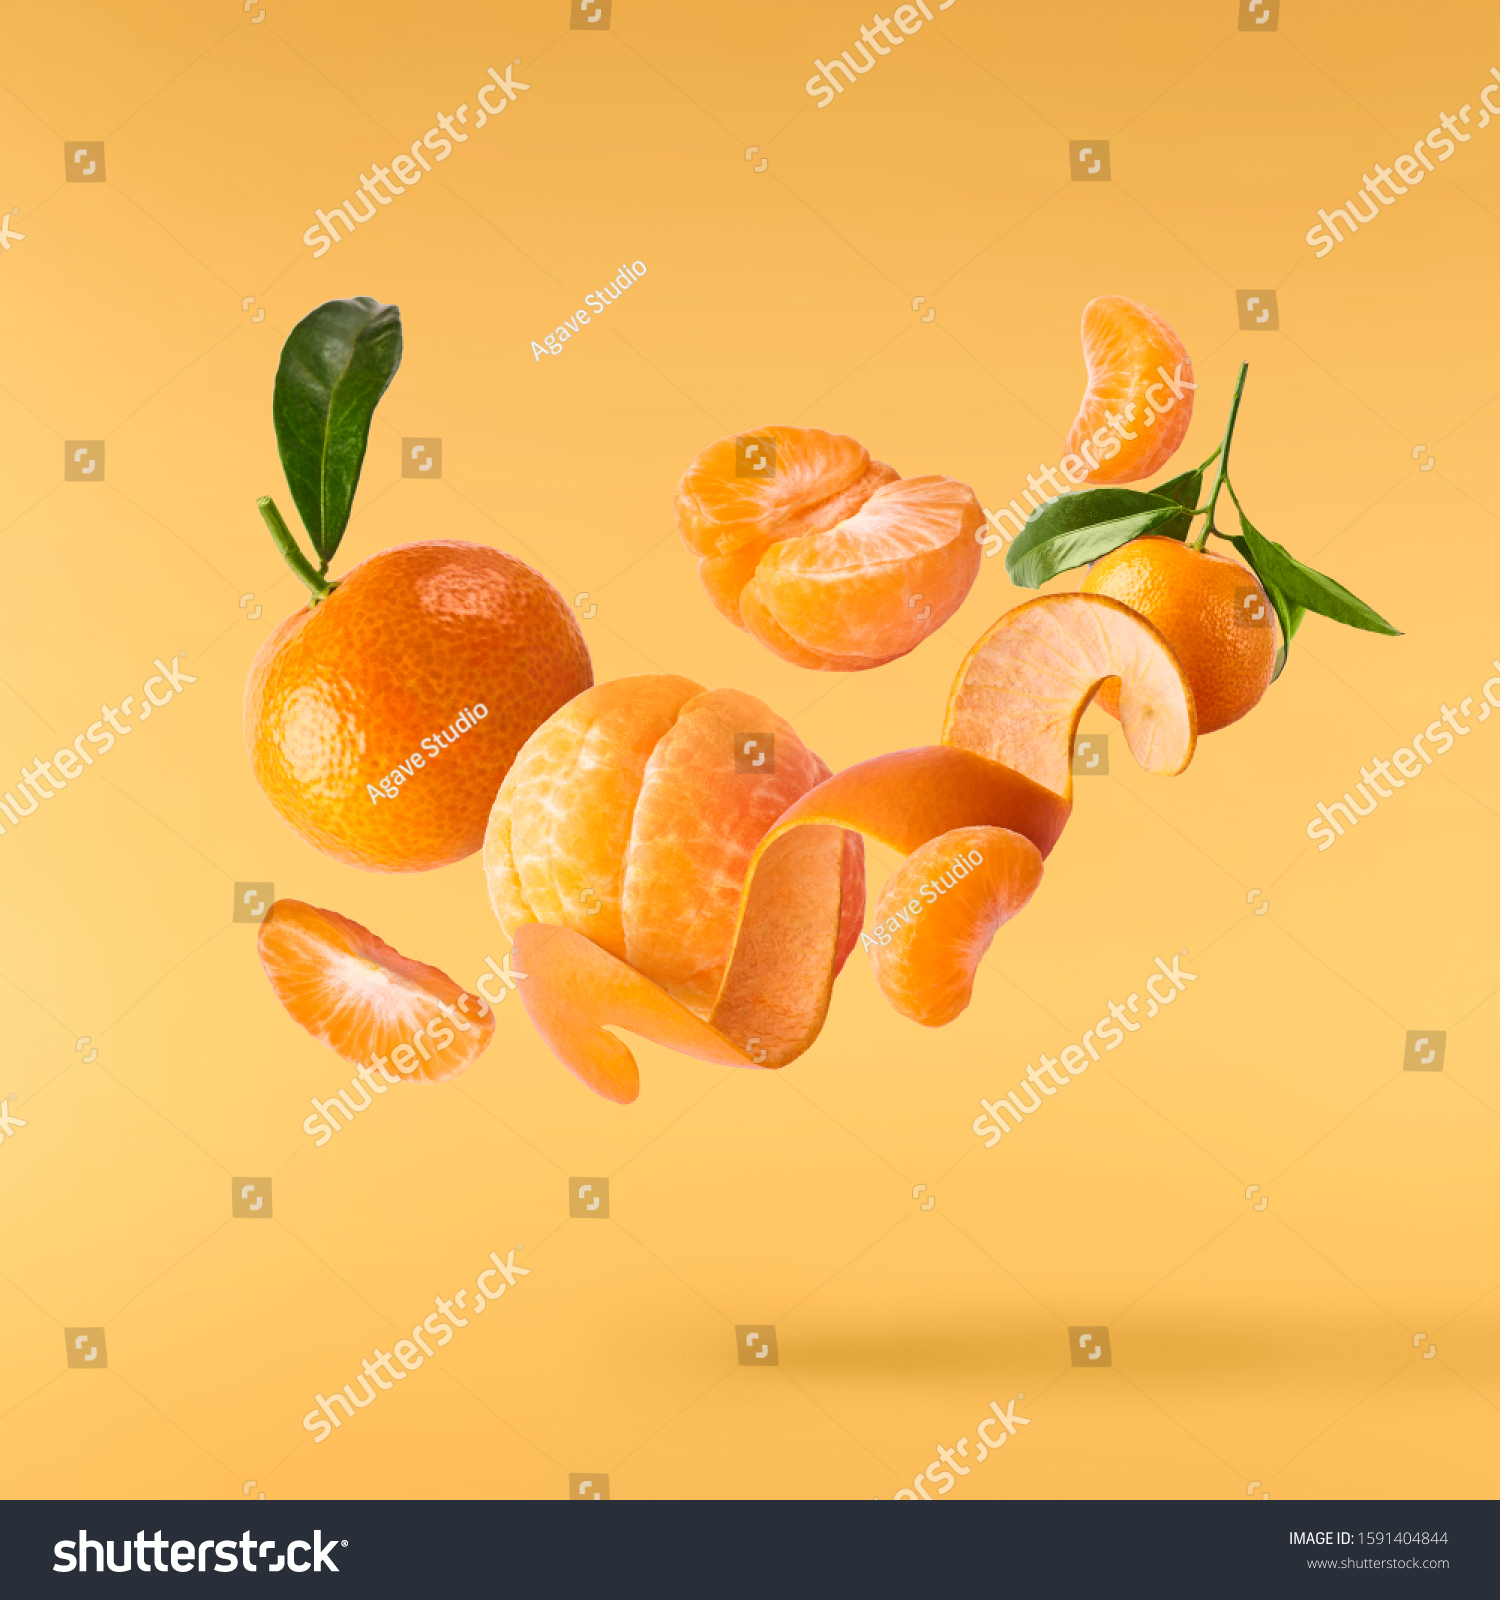 Fresh ripe mandarine with leaves falling in the air. Cut and whole mandarine isolated on yellow background. Food levitation concept. High resolution image #1591404844